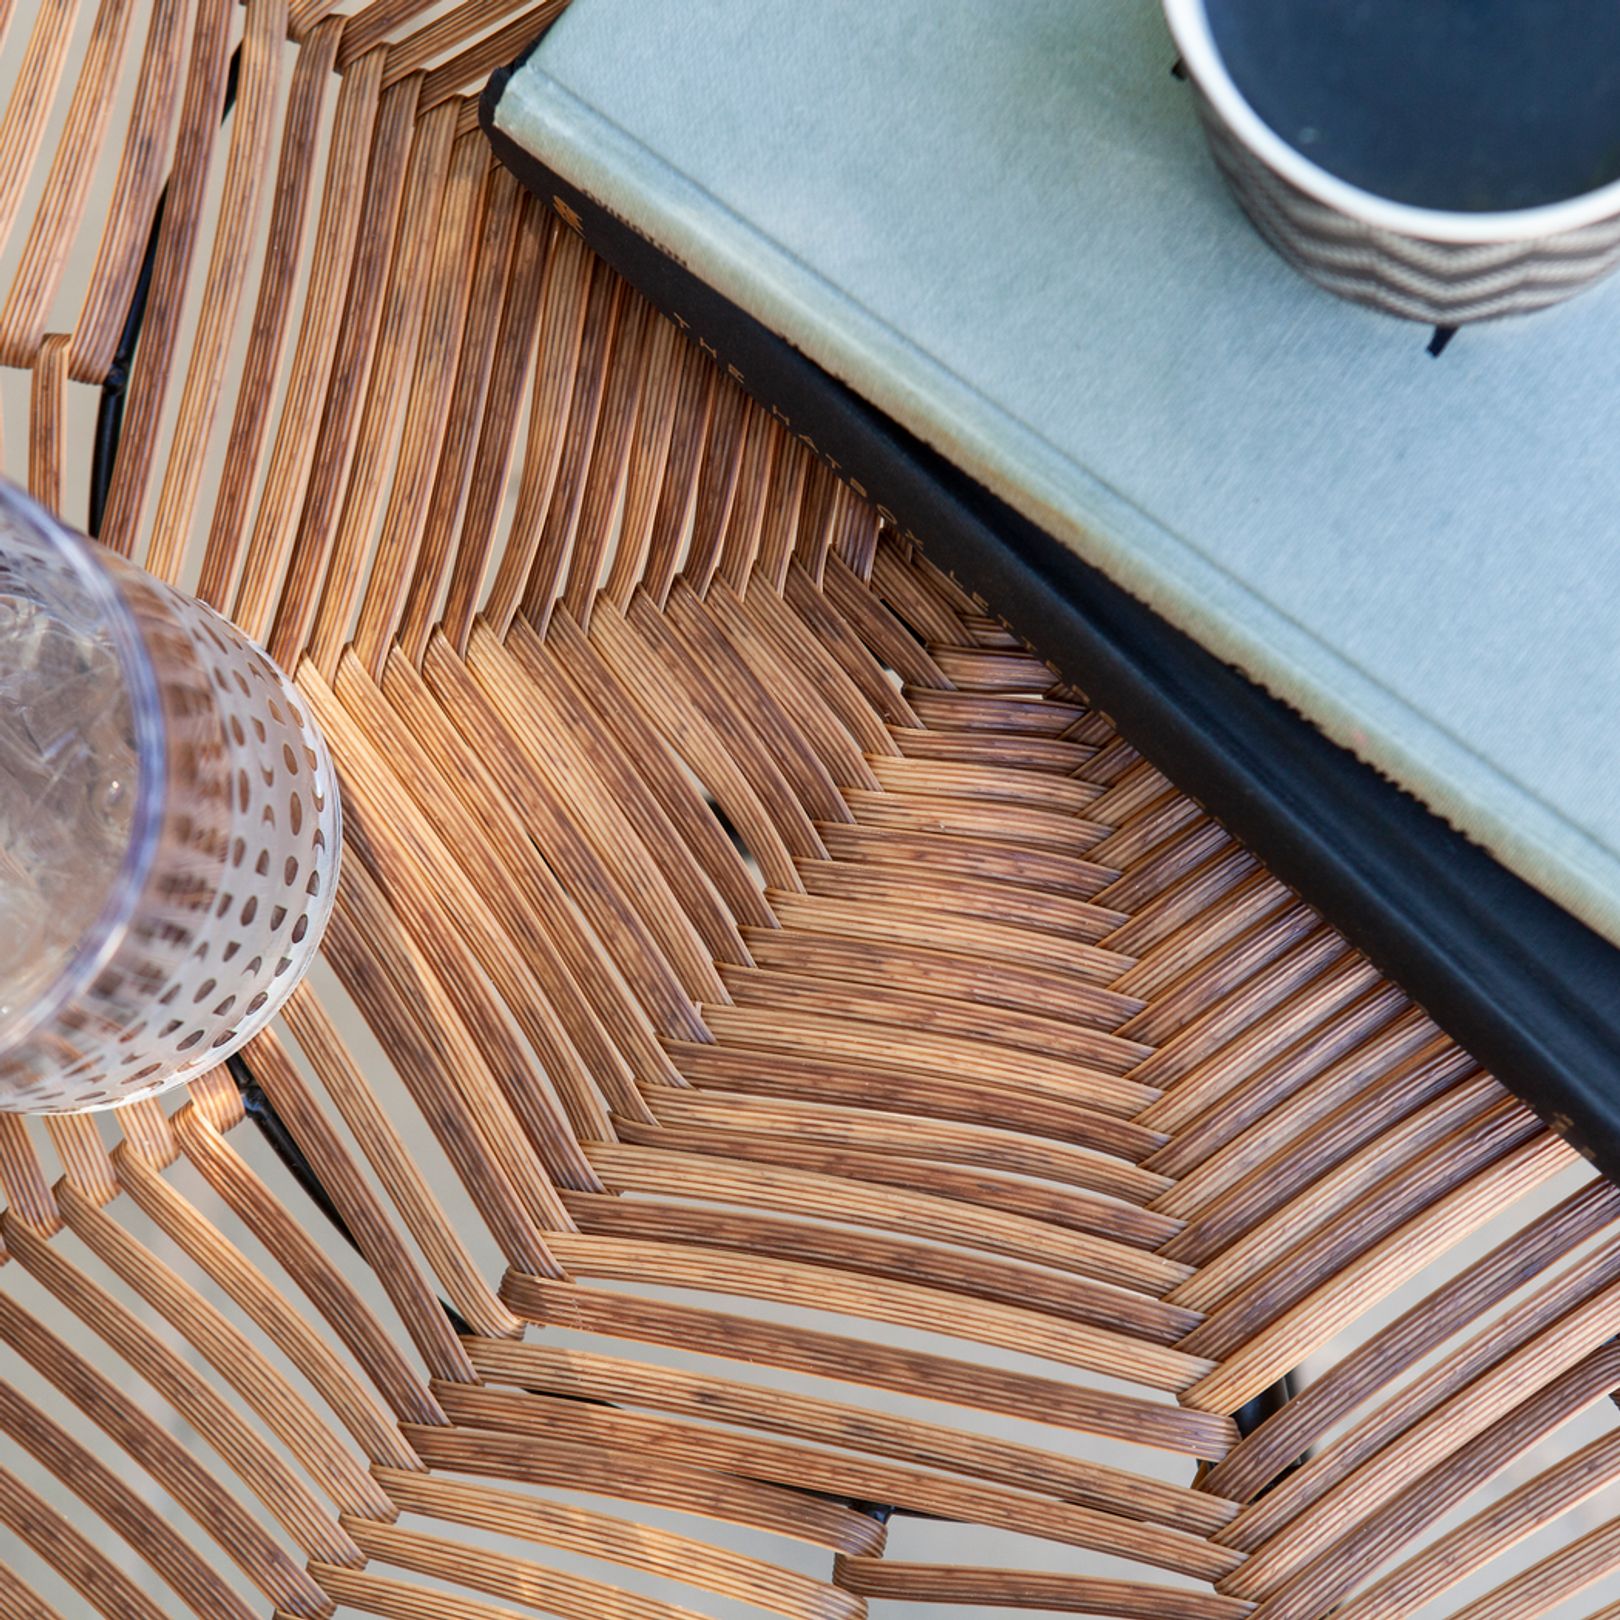 Close up photo of wicker tabletop with books and a glass